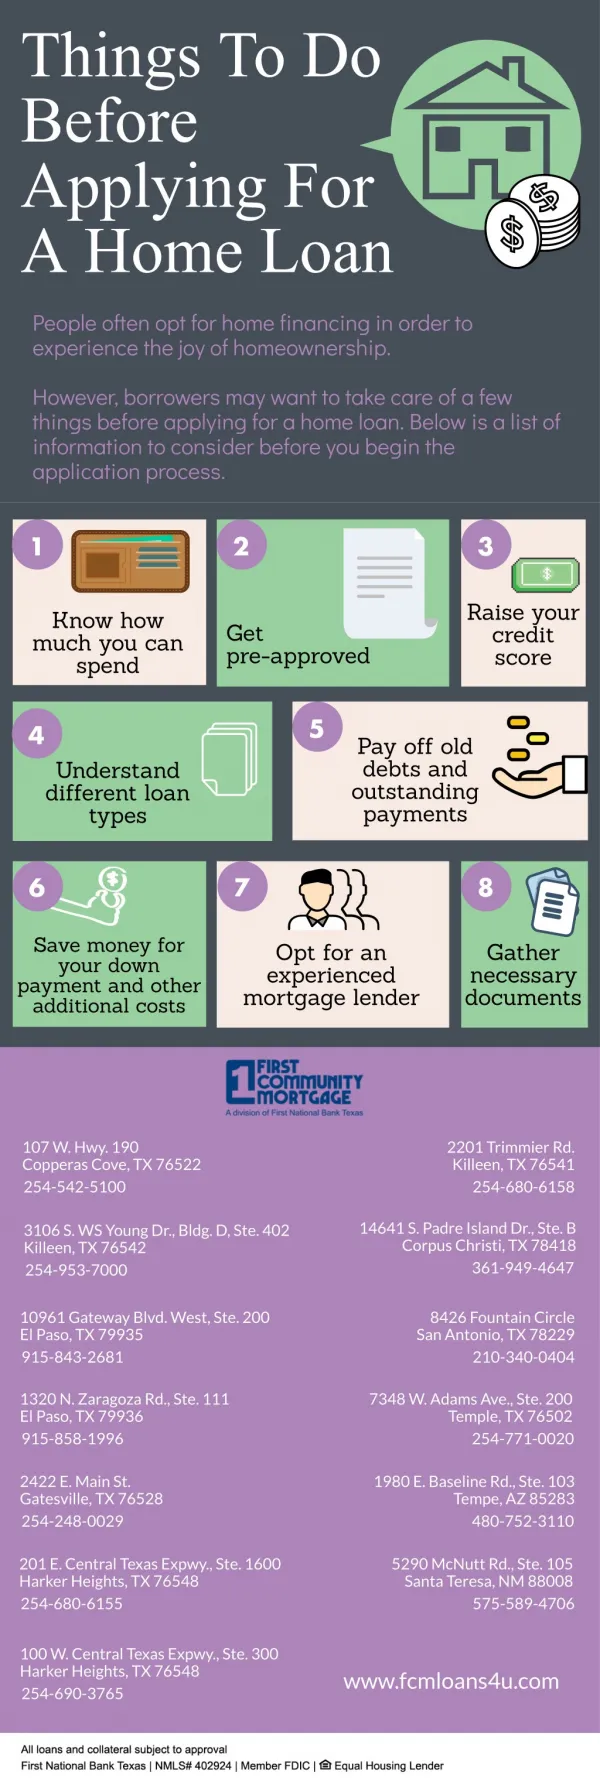 Things To Do Before Applying For A Home Loan